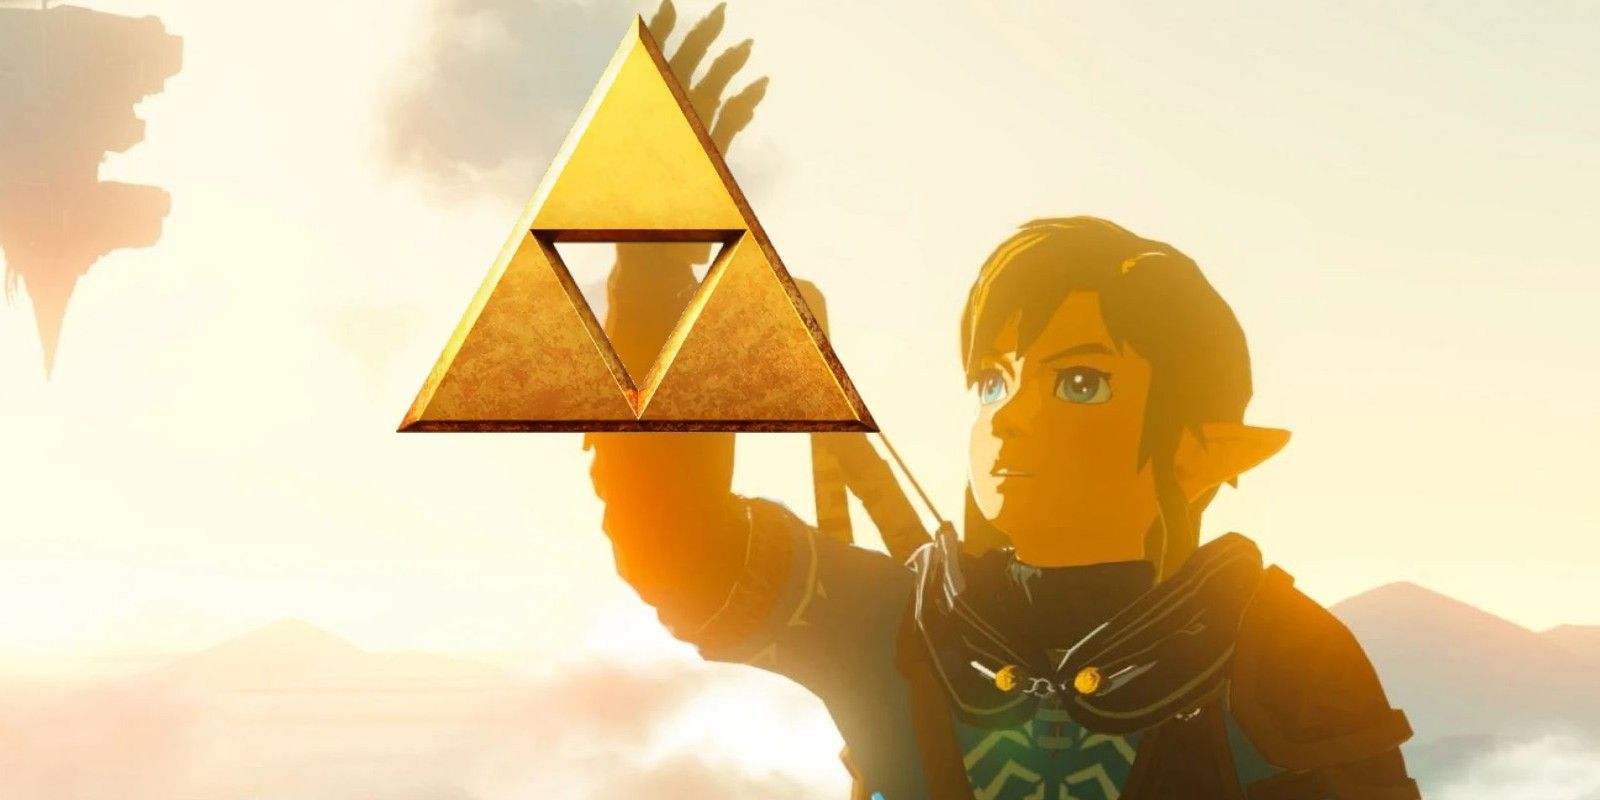 Is The Triforce In Tears Of The Kingdom - In picture of Link examining the Arm of Rauru in Tears of the Kingdom with a Triforce image added